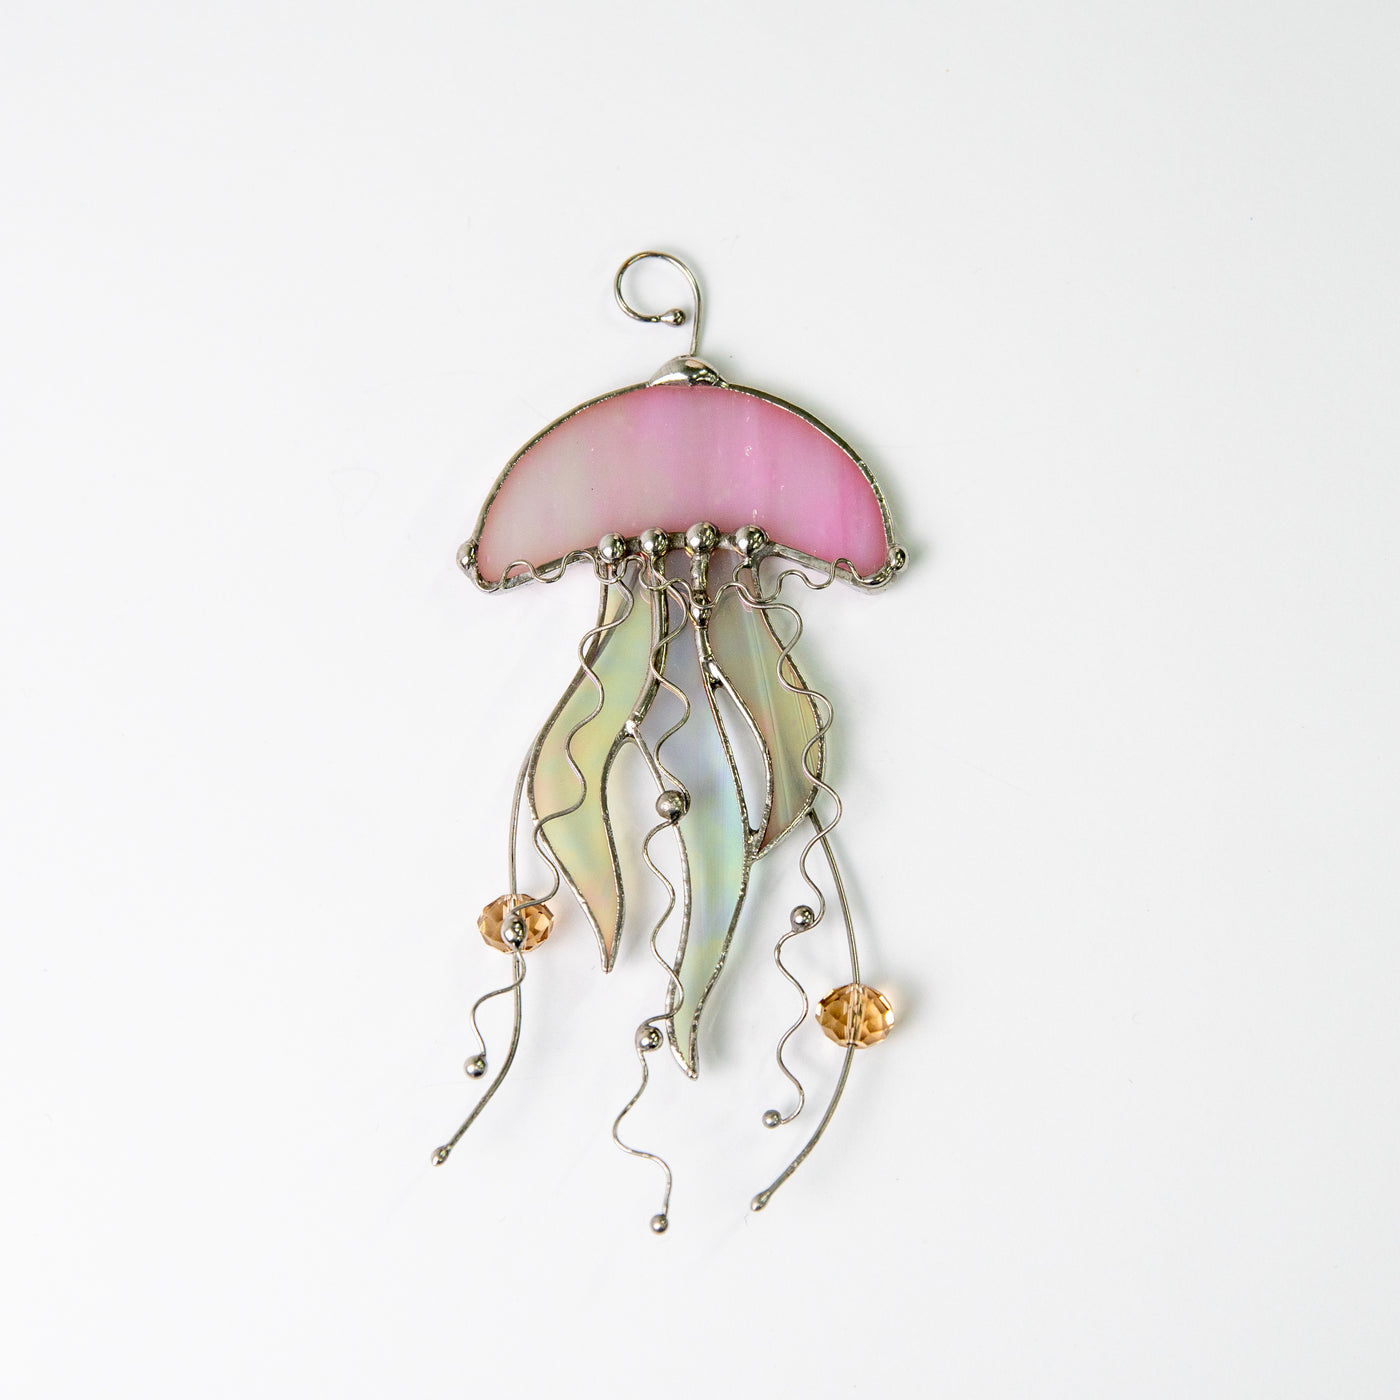 Window hanging of a stained glass pink jellyfish with iridescent tentacles